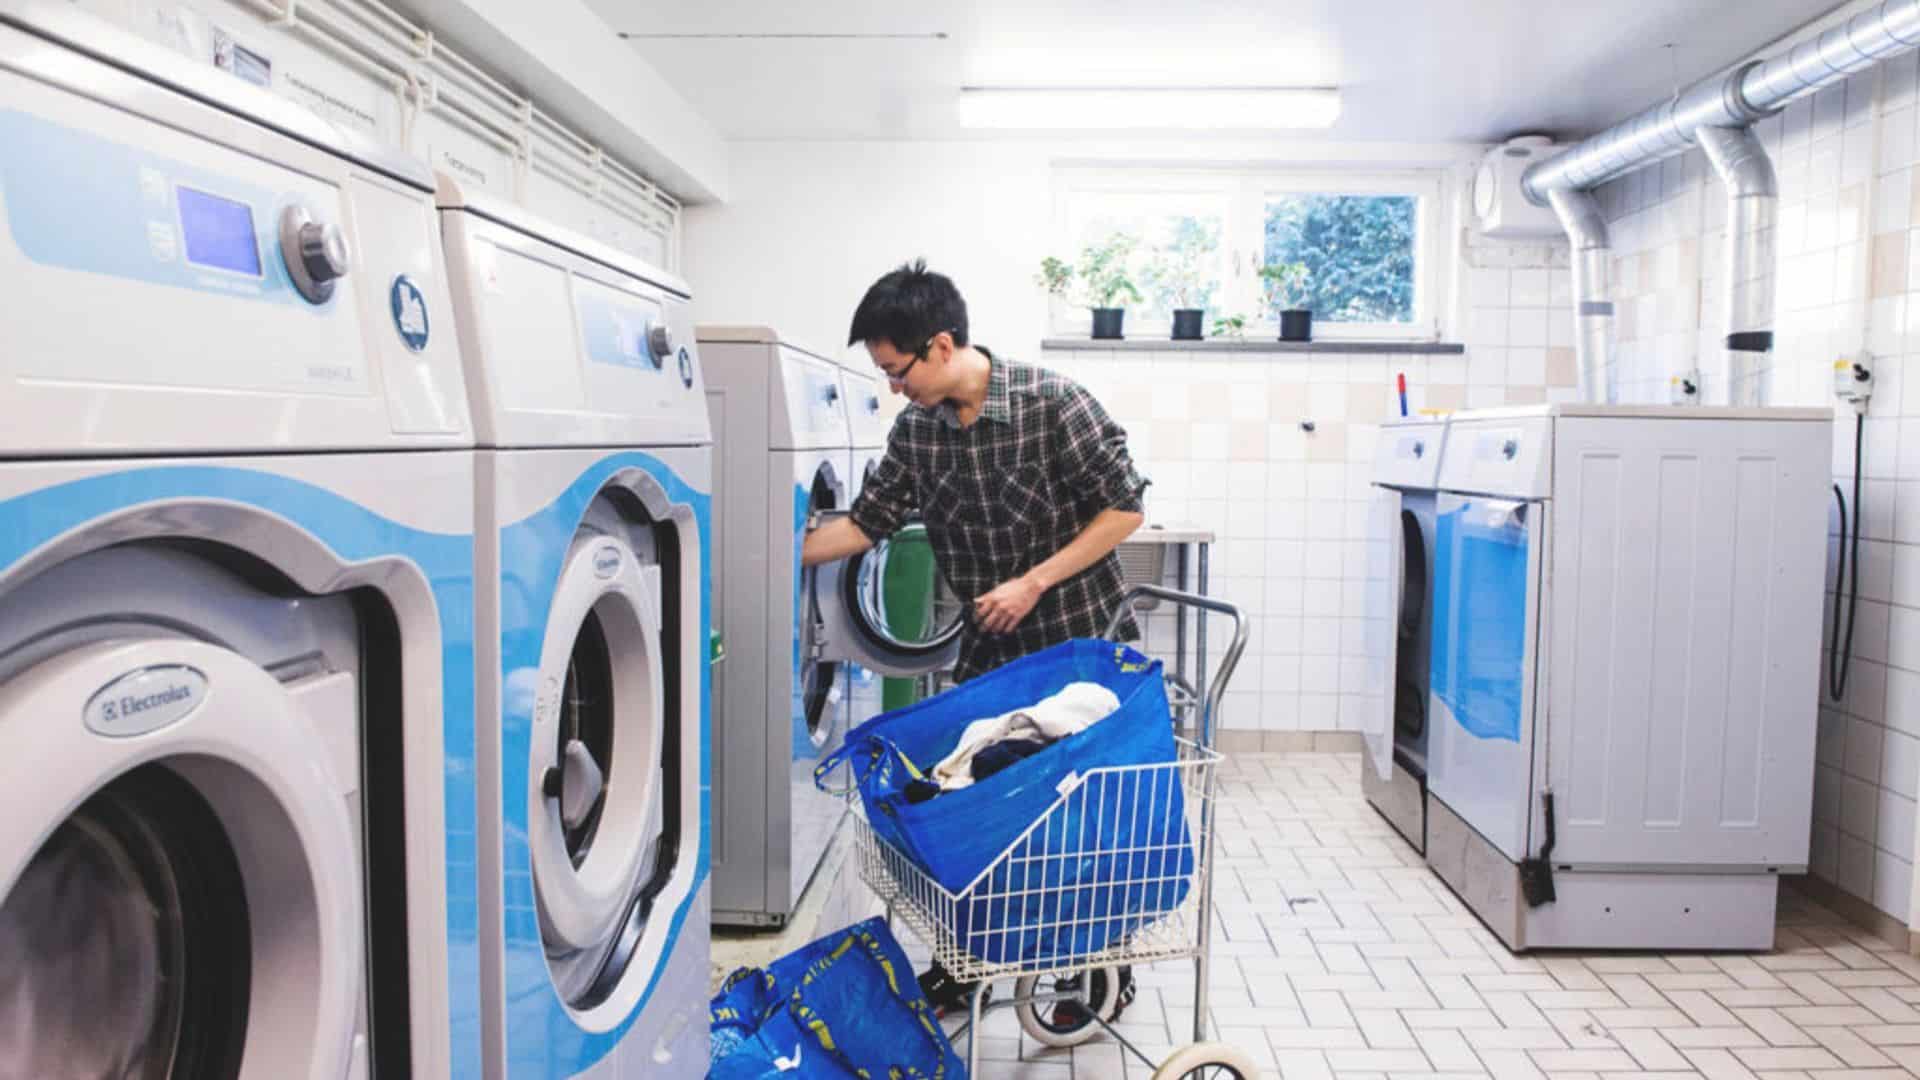 Profеssional Laundry Sеrvicеs in Discovеry Gardеns